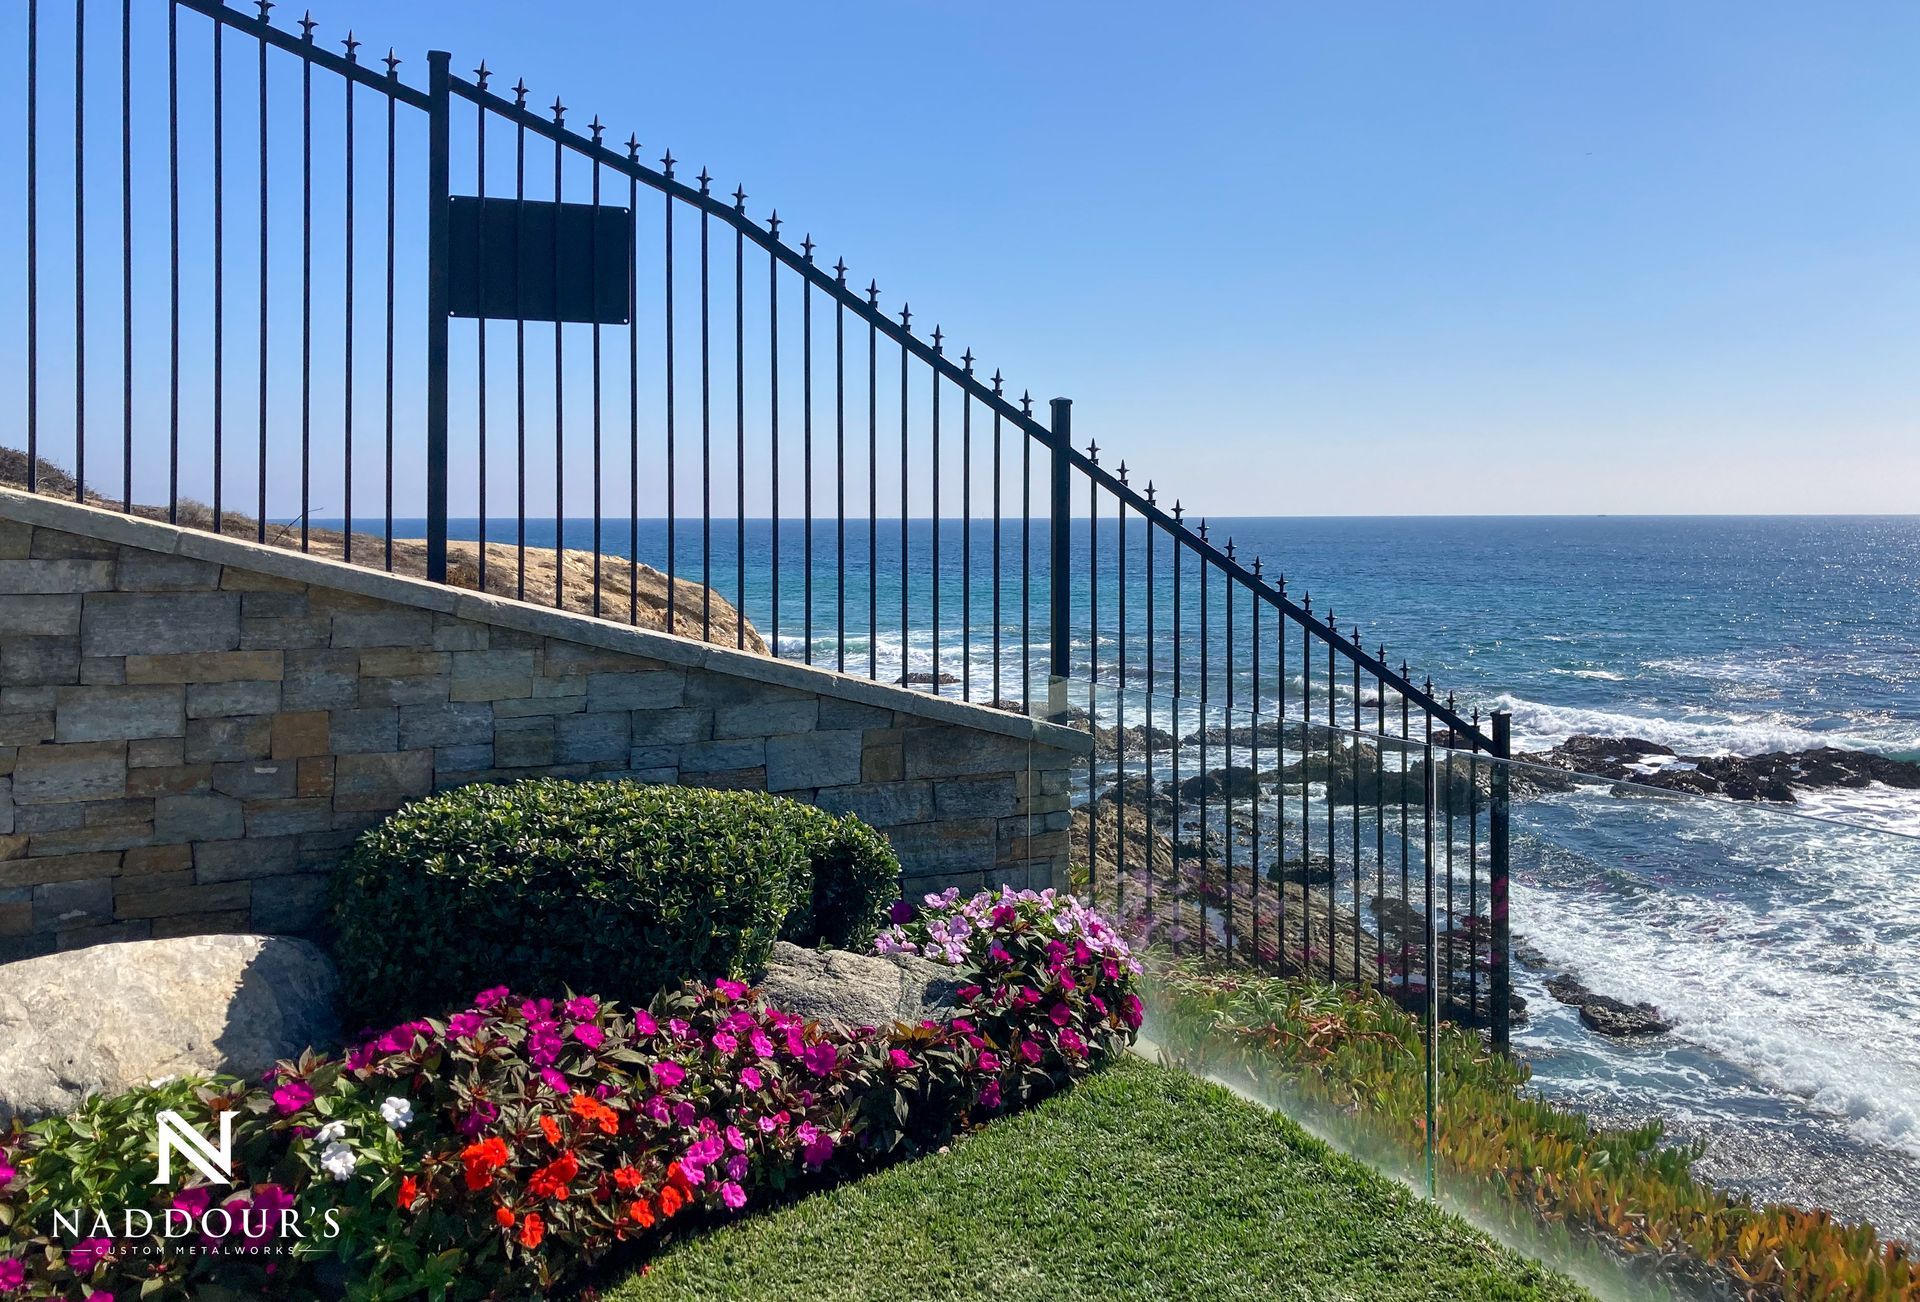 A wrought iron fence leading to the ocean with flowers in the foreground